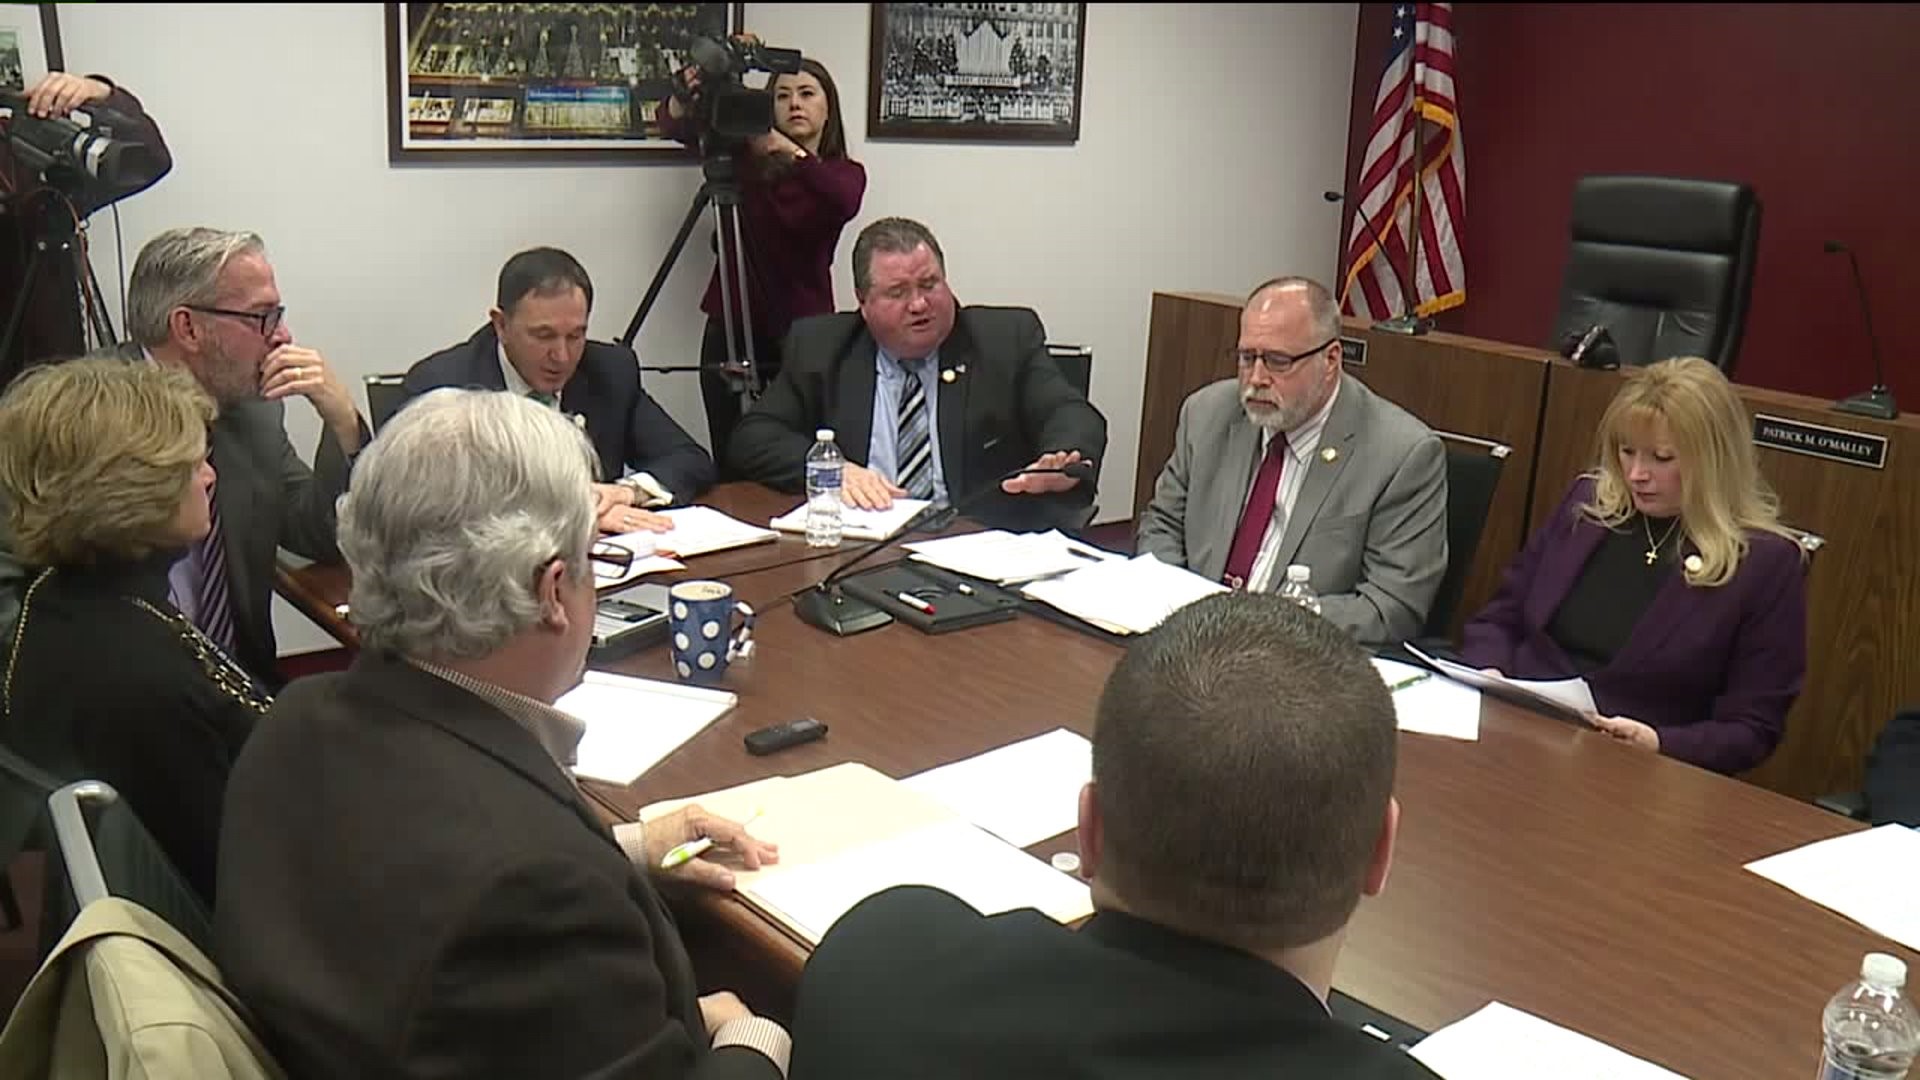 Scranton City Leaders Ask County for Property Tax Reassessment